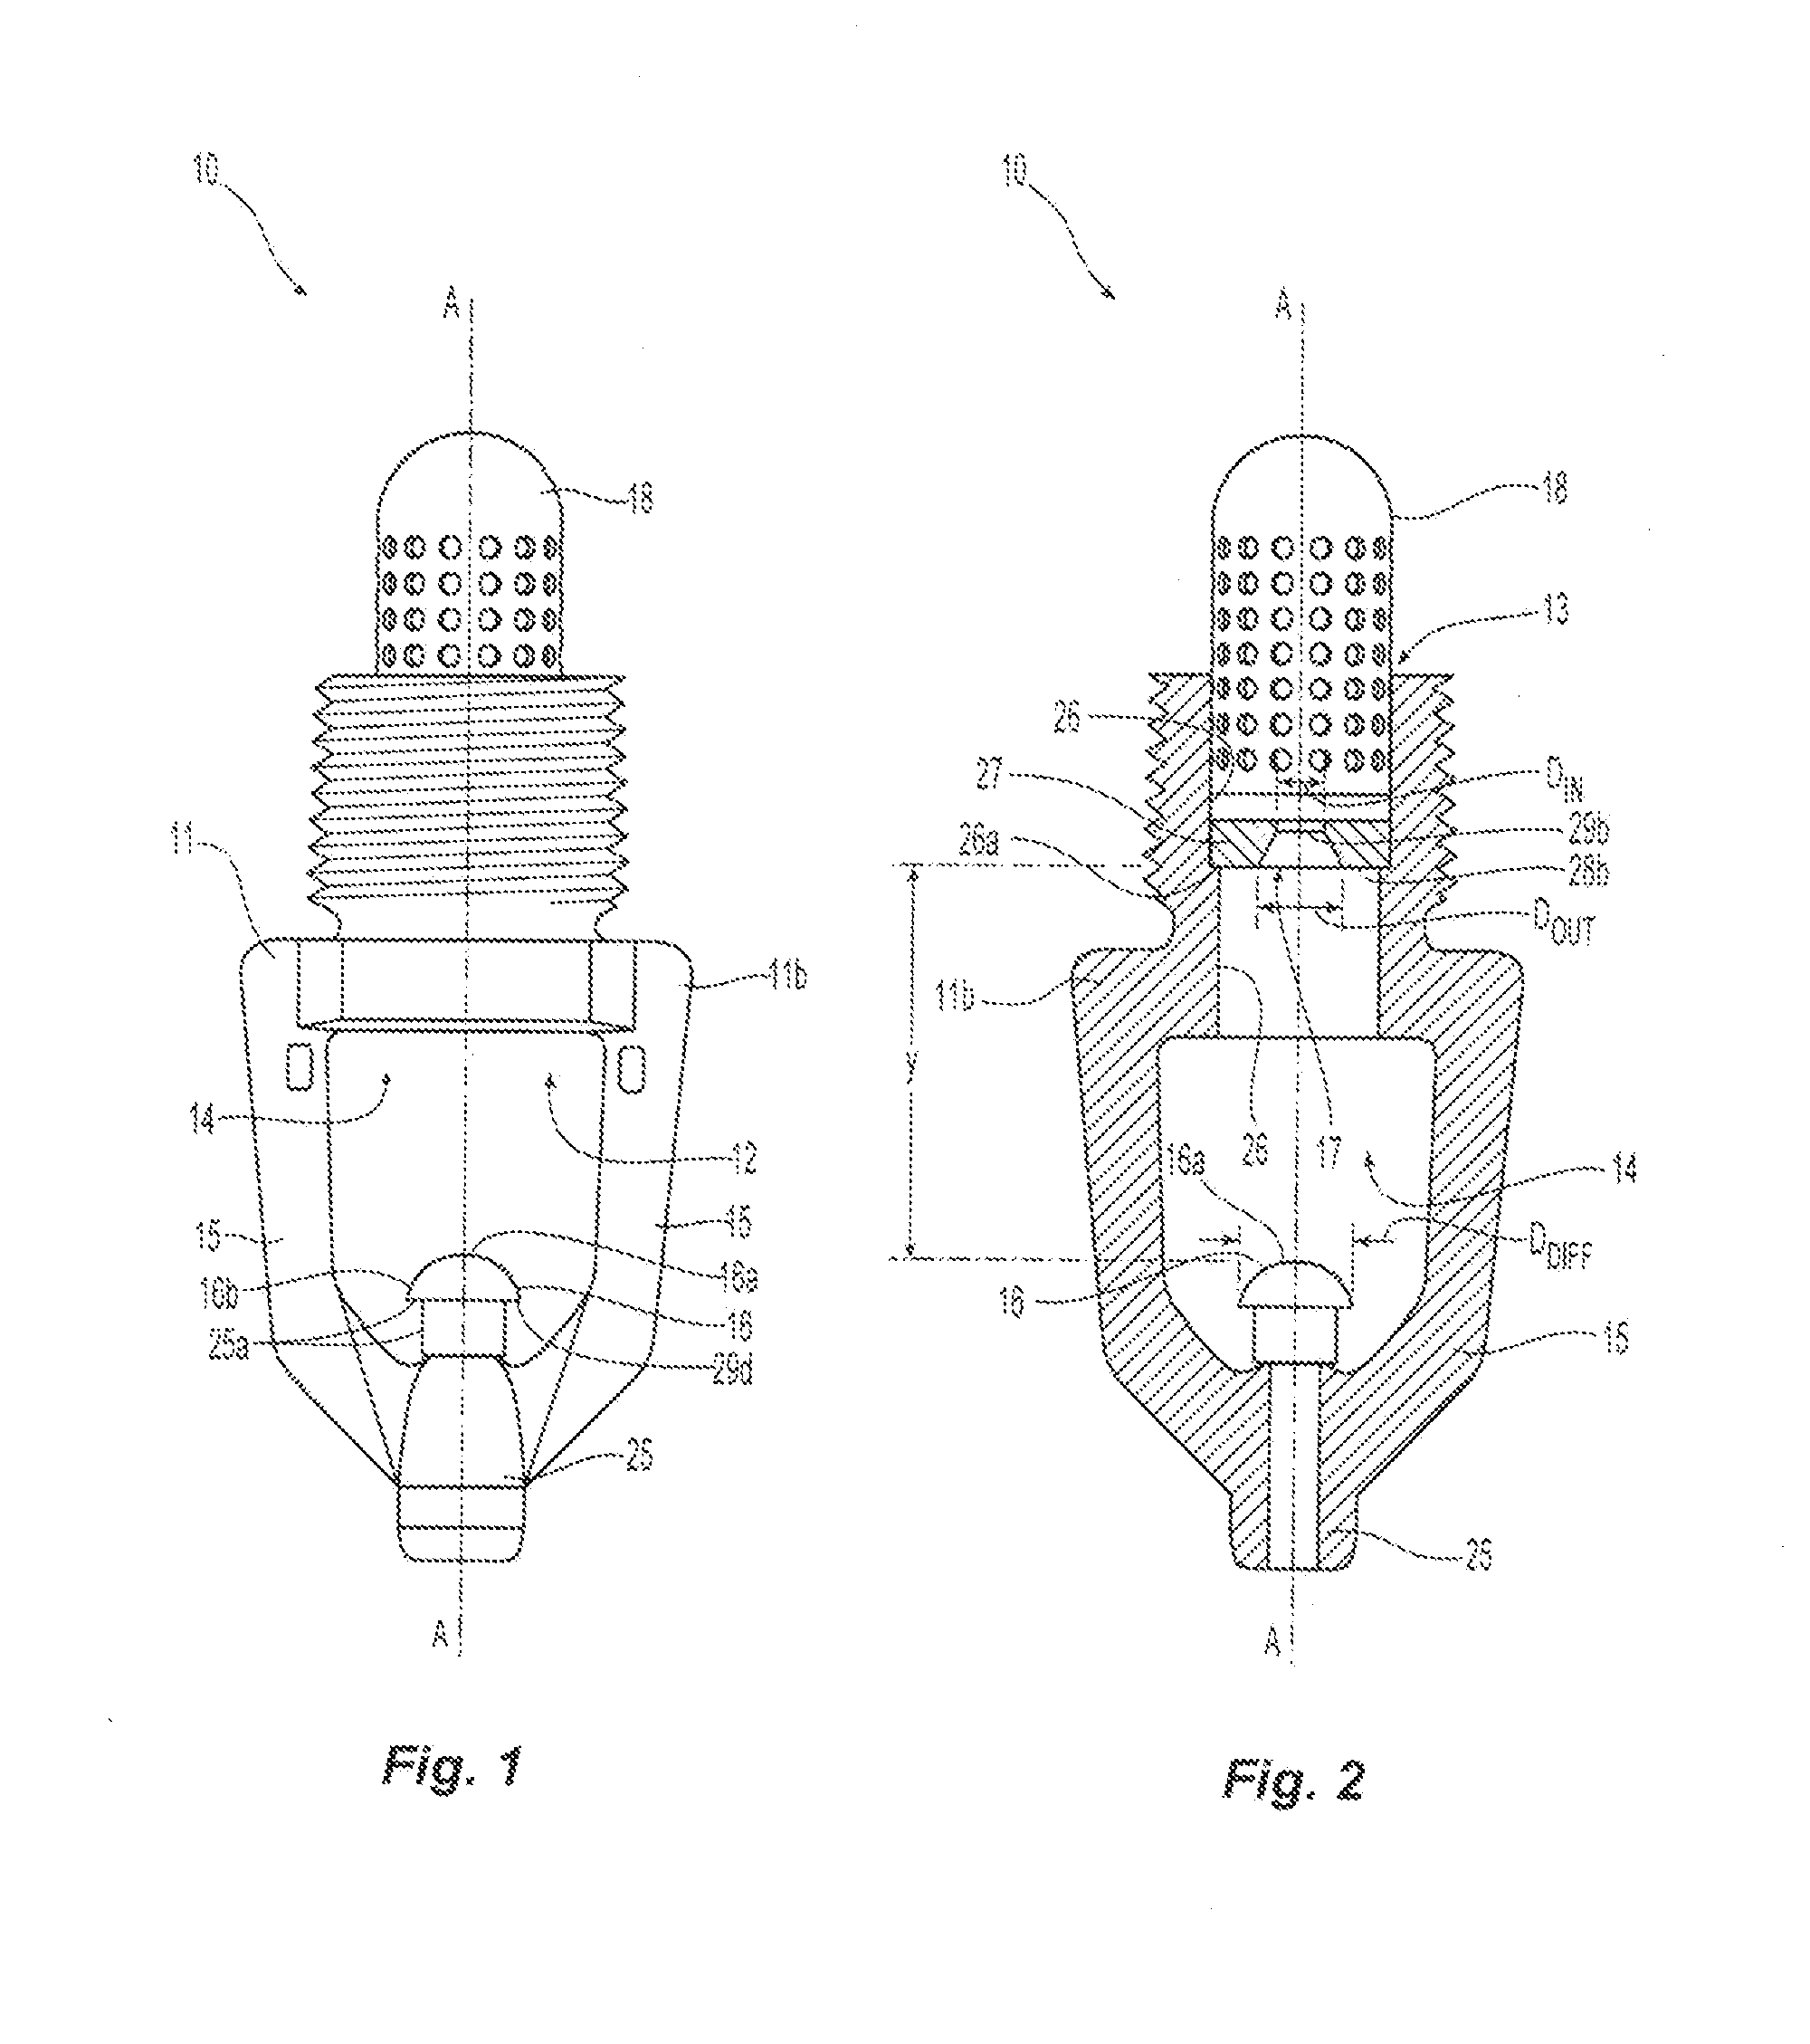 Fire protection device and method for fire protection of an industrial oil cooker